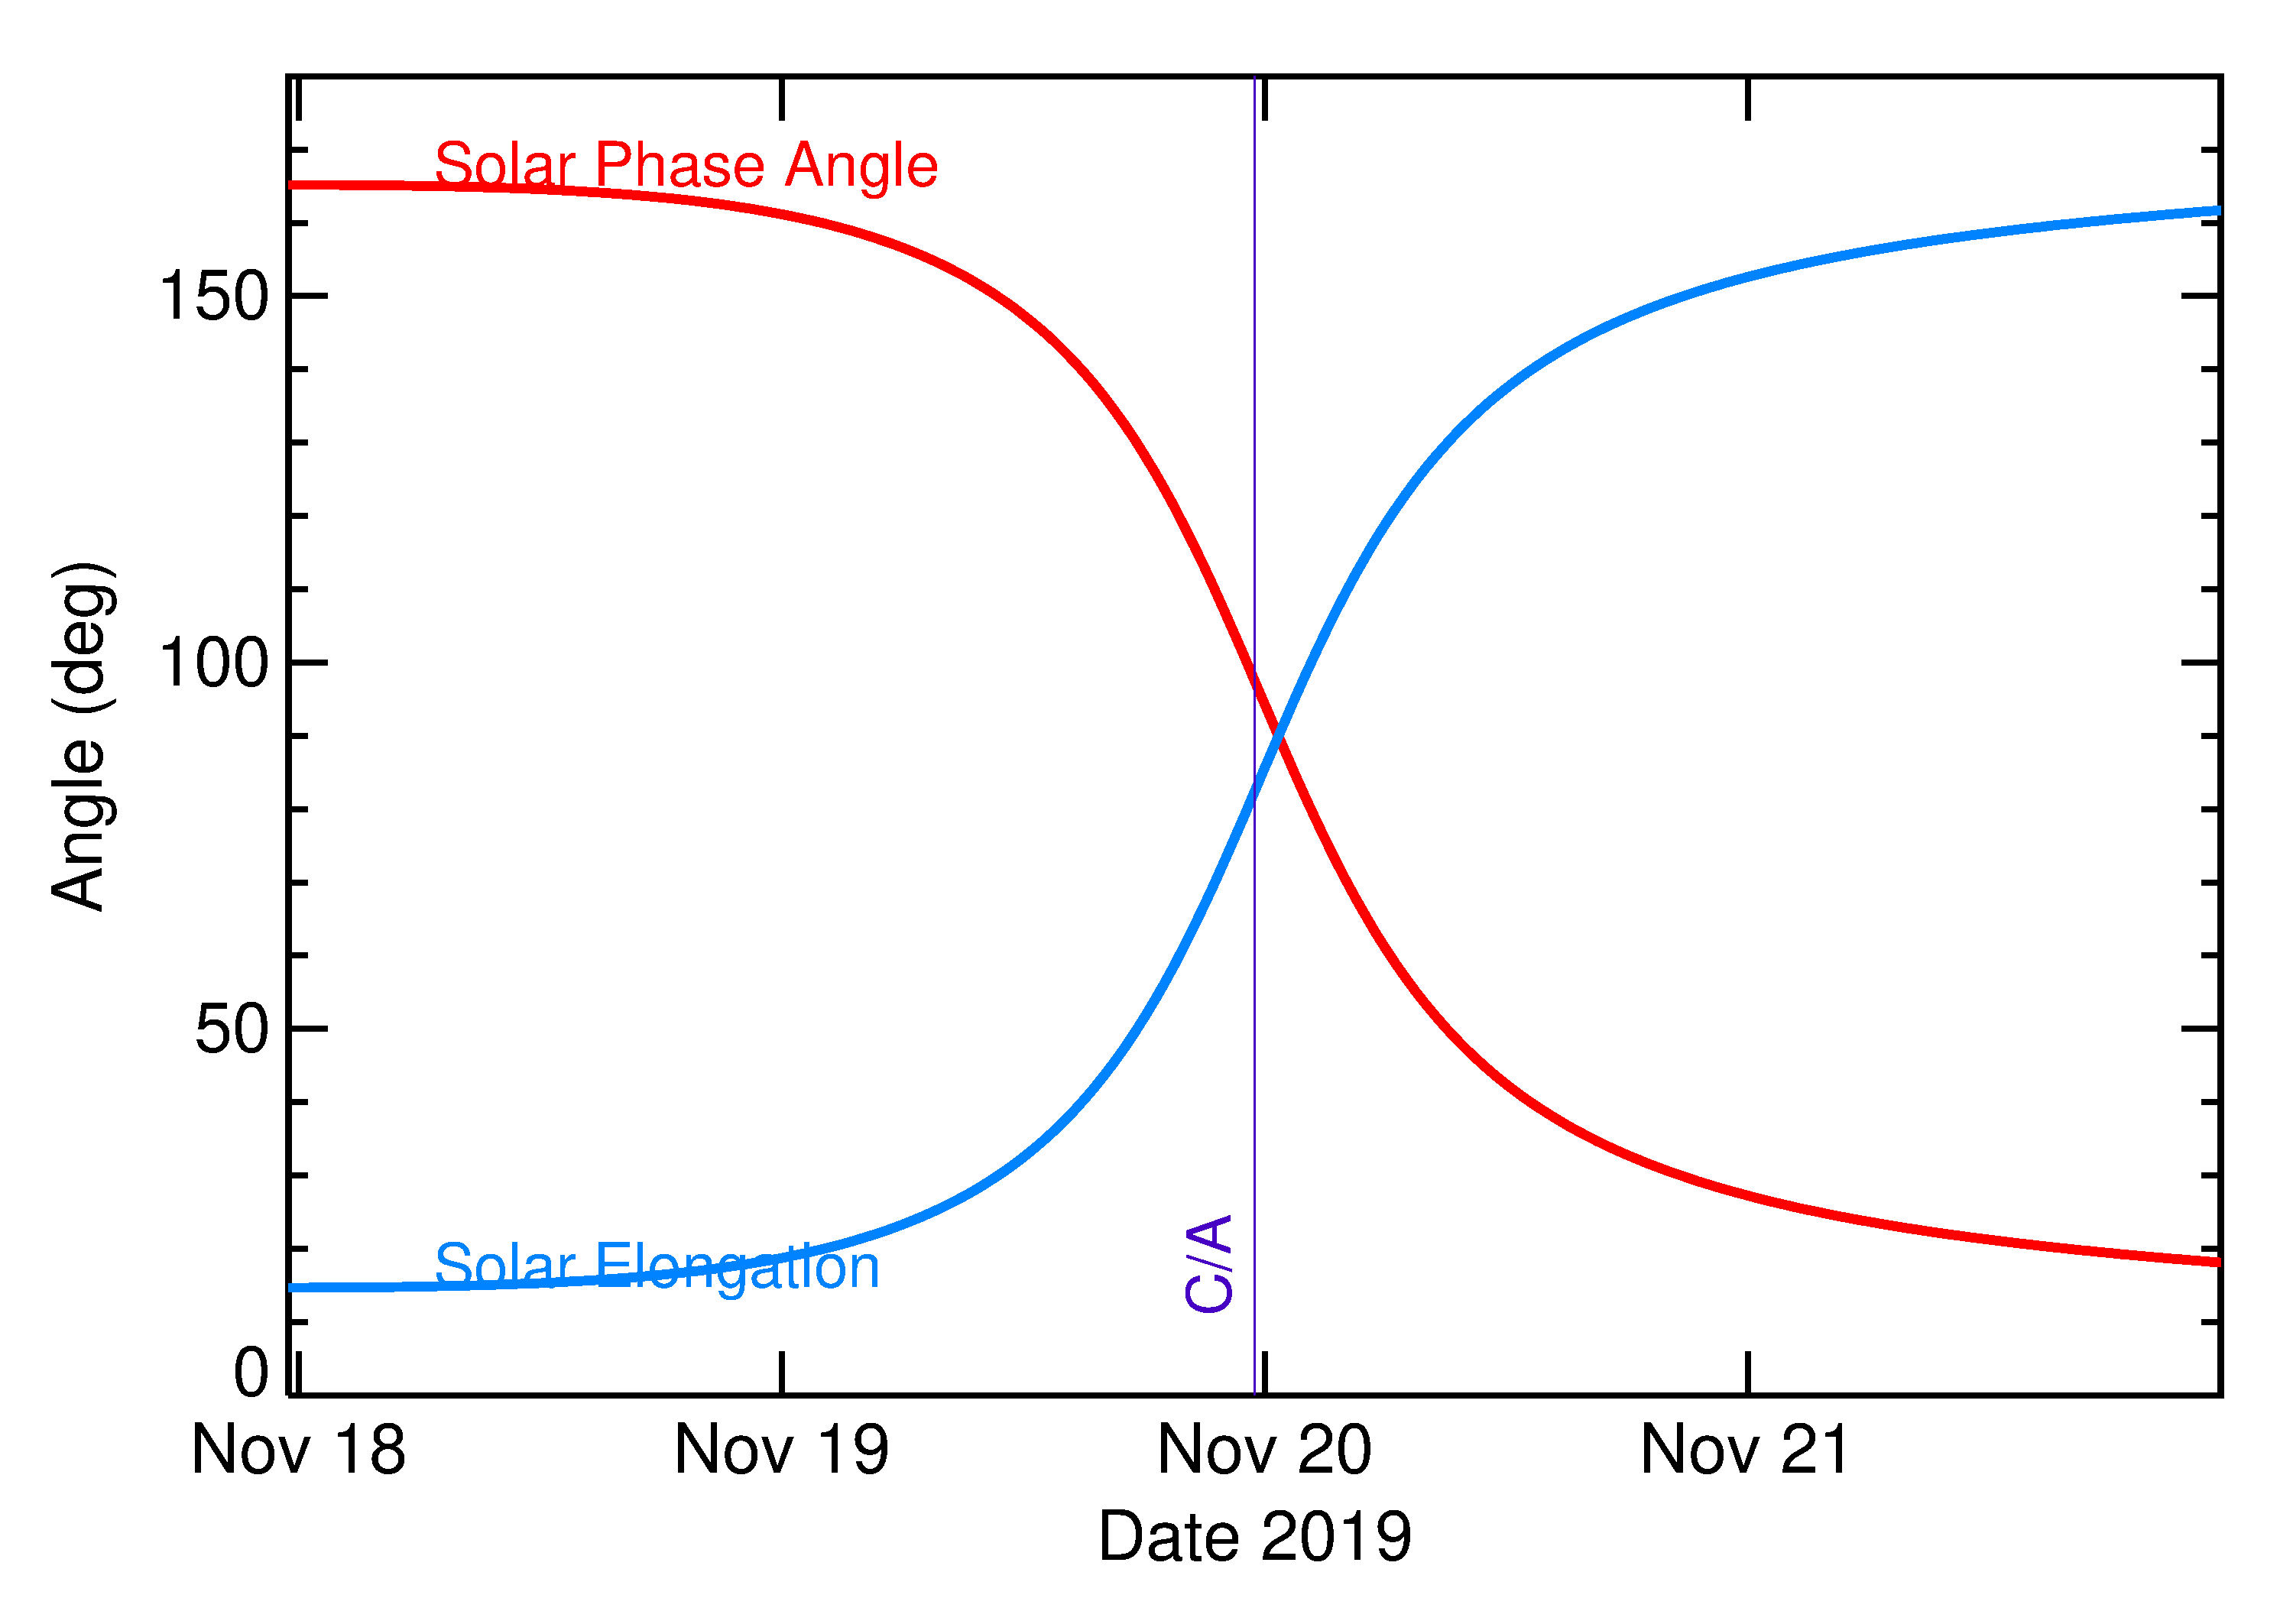 Solar Elongation and Solar Phase Angle of 2019 WV1 in the days around closest approach